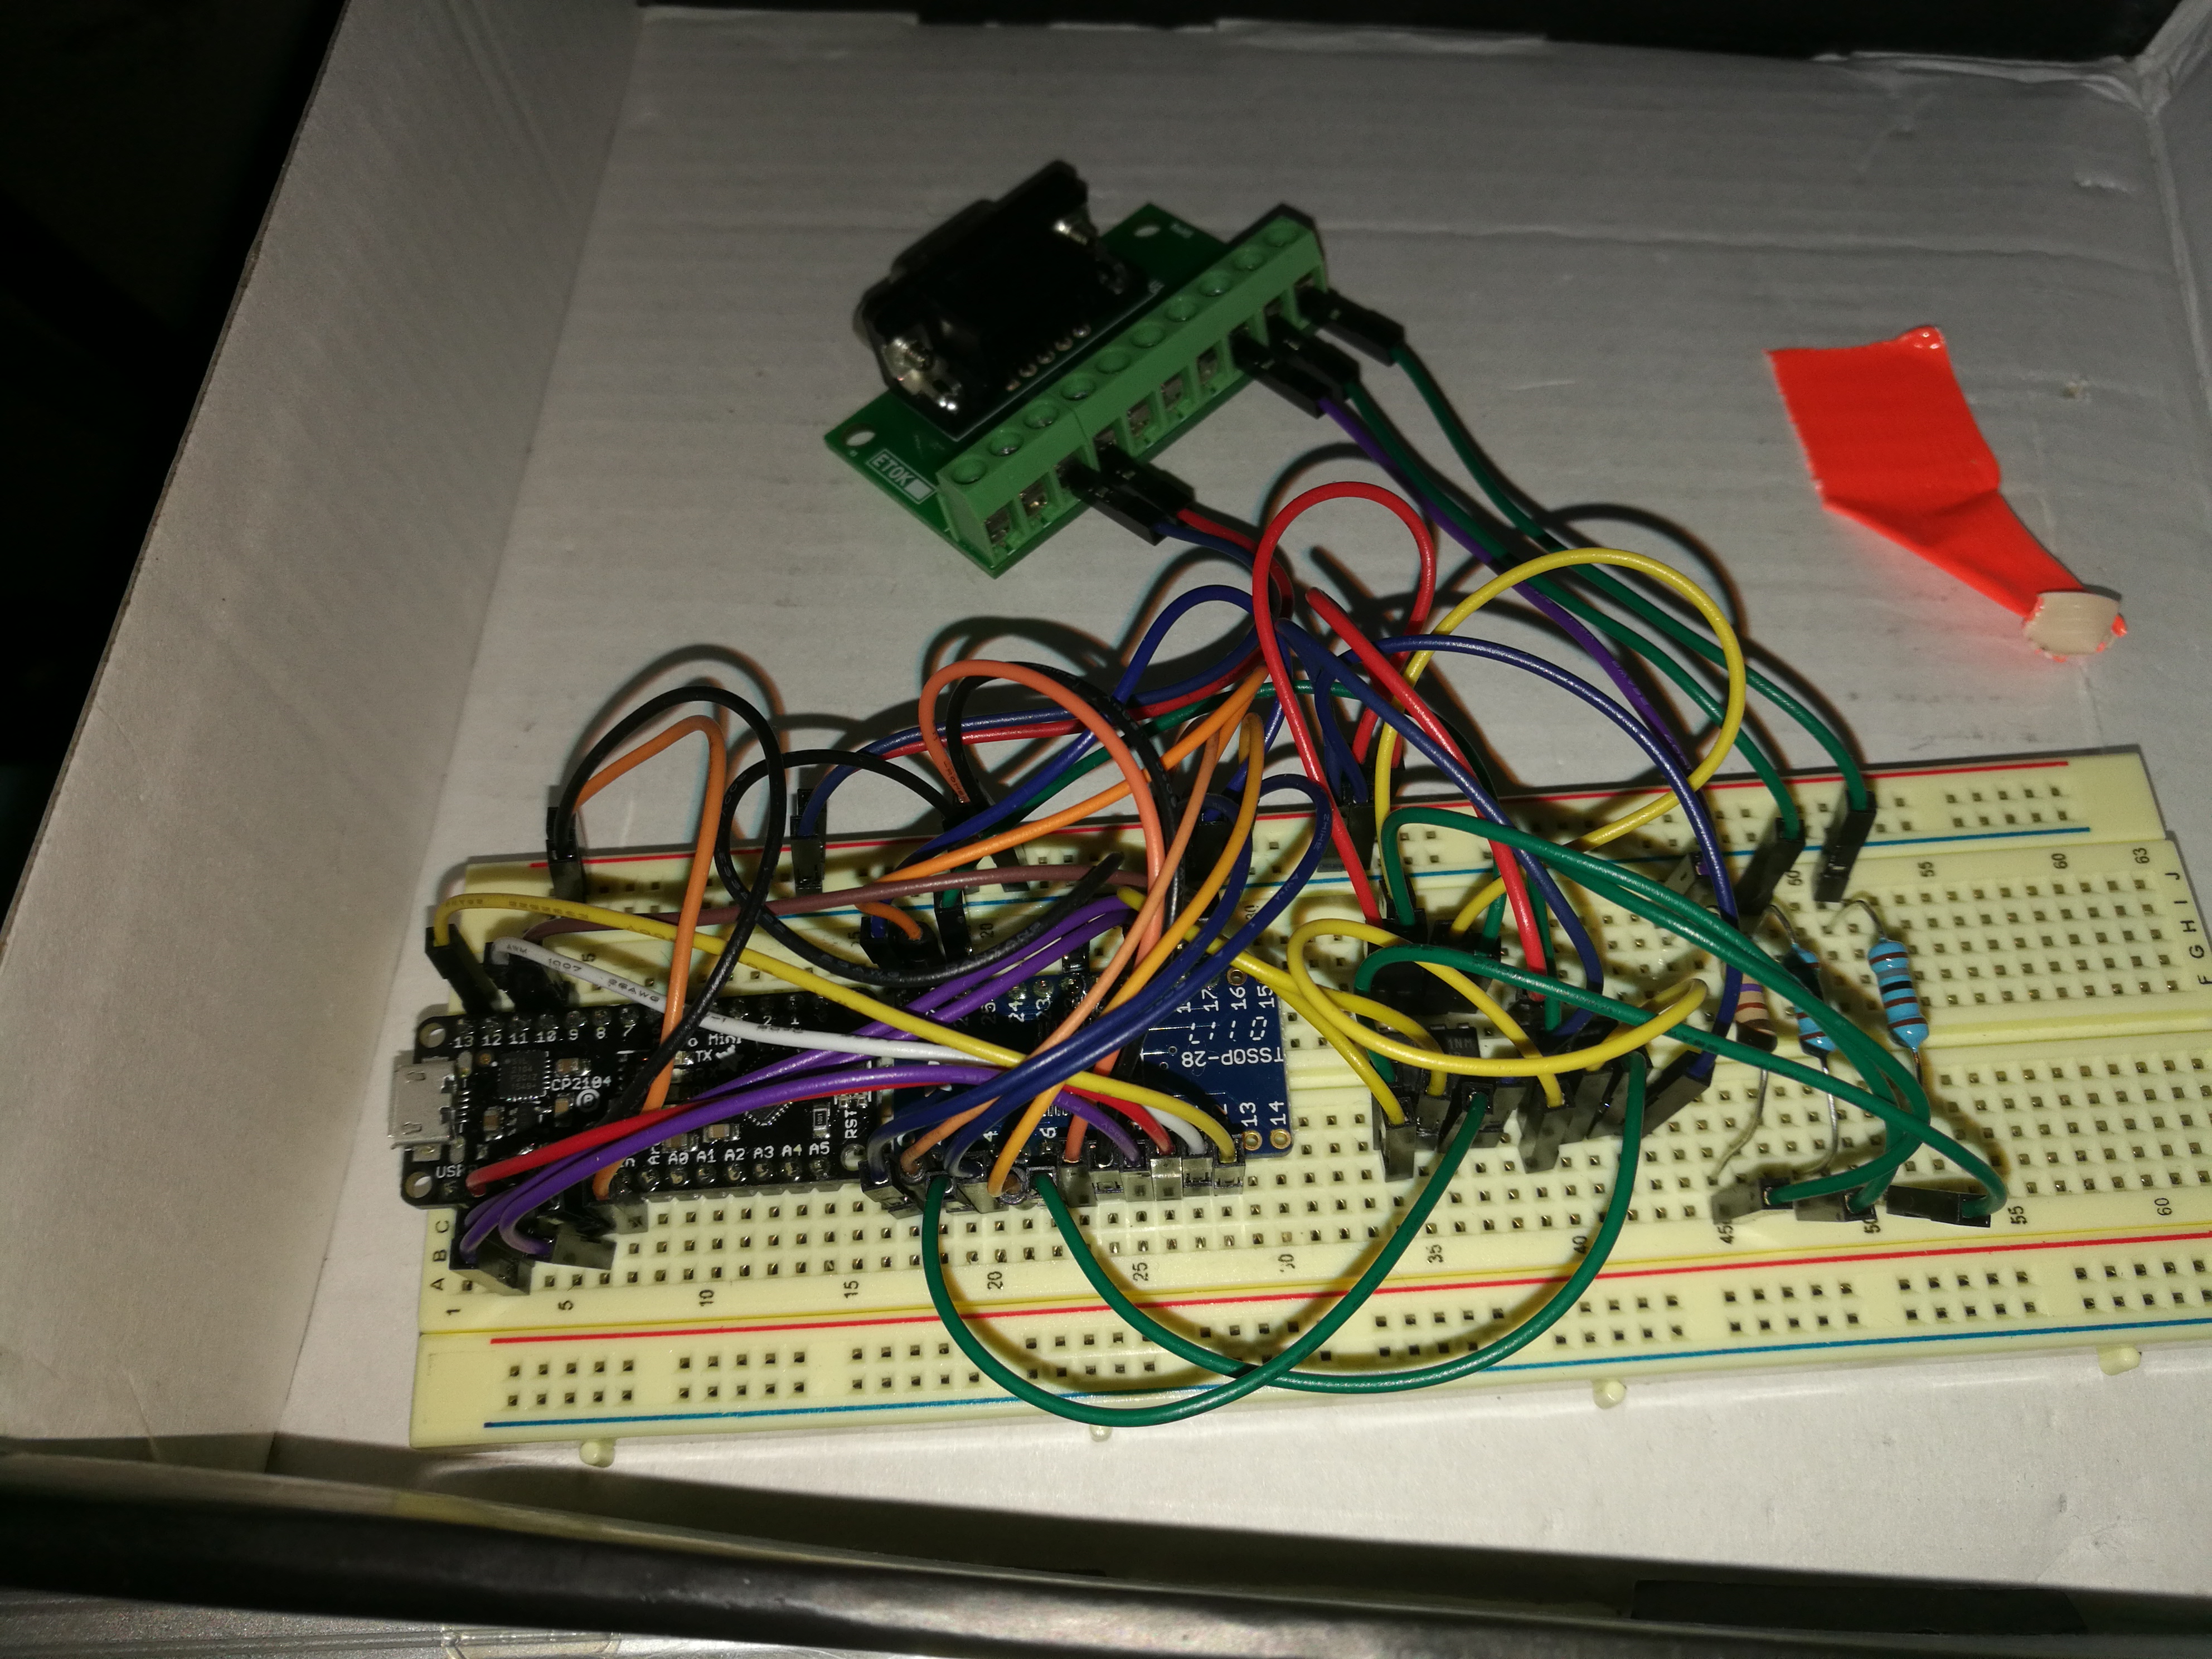 breadboarded prototype for power wheelchair controller